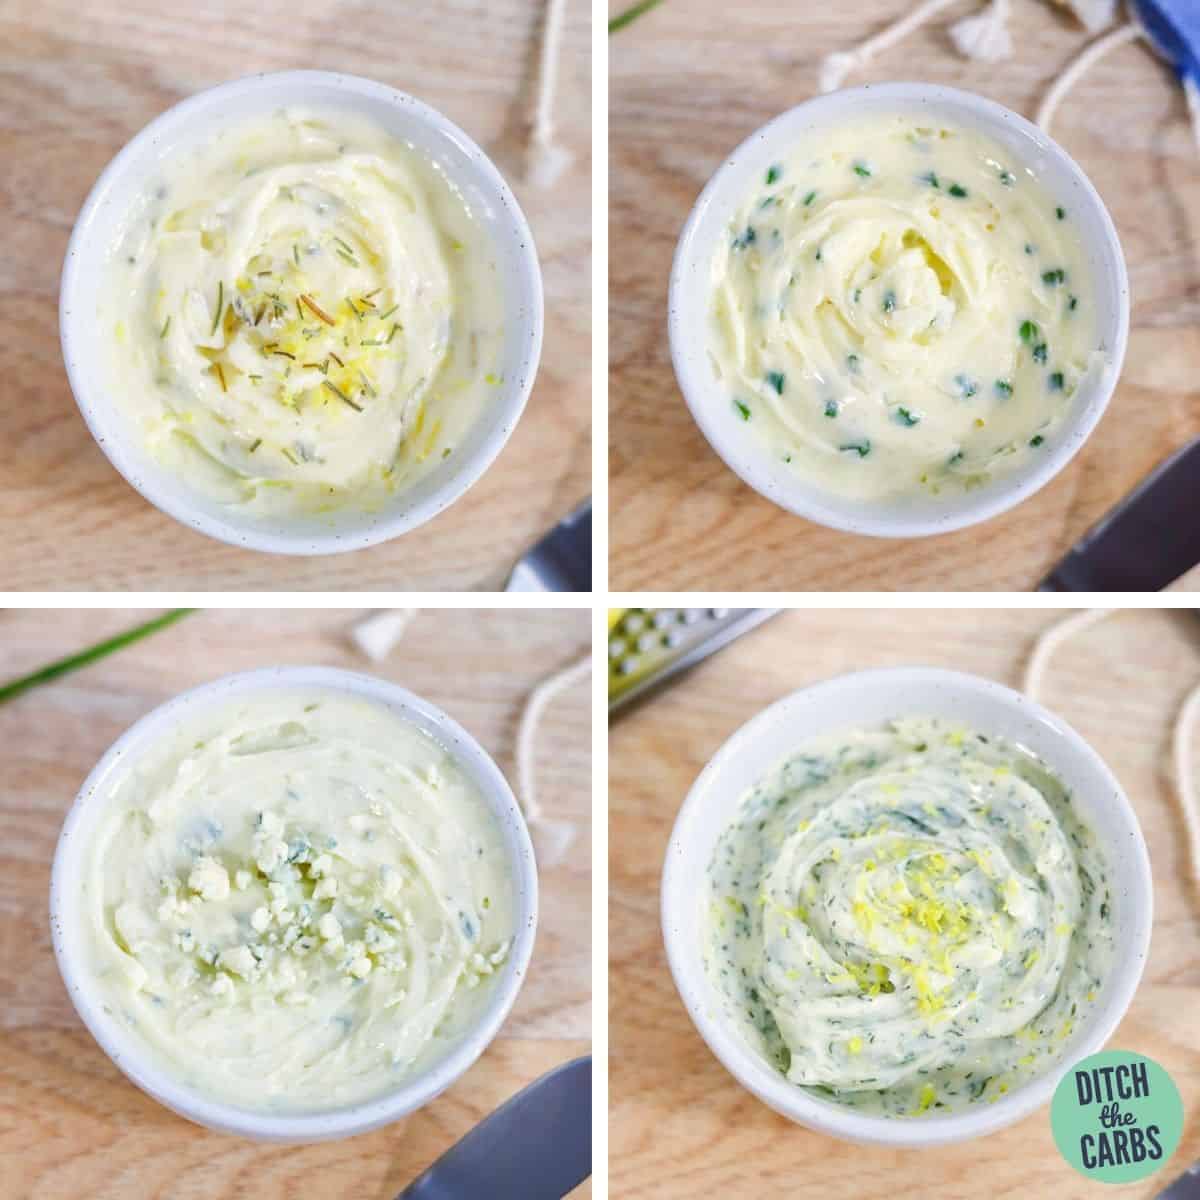 https://thinlicious.com/wp-content/uploads/2016/06/How-to-make-herbed-butter-4-flavoirs-1200x1200-1.jpg